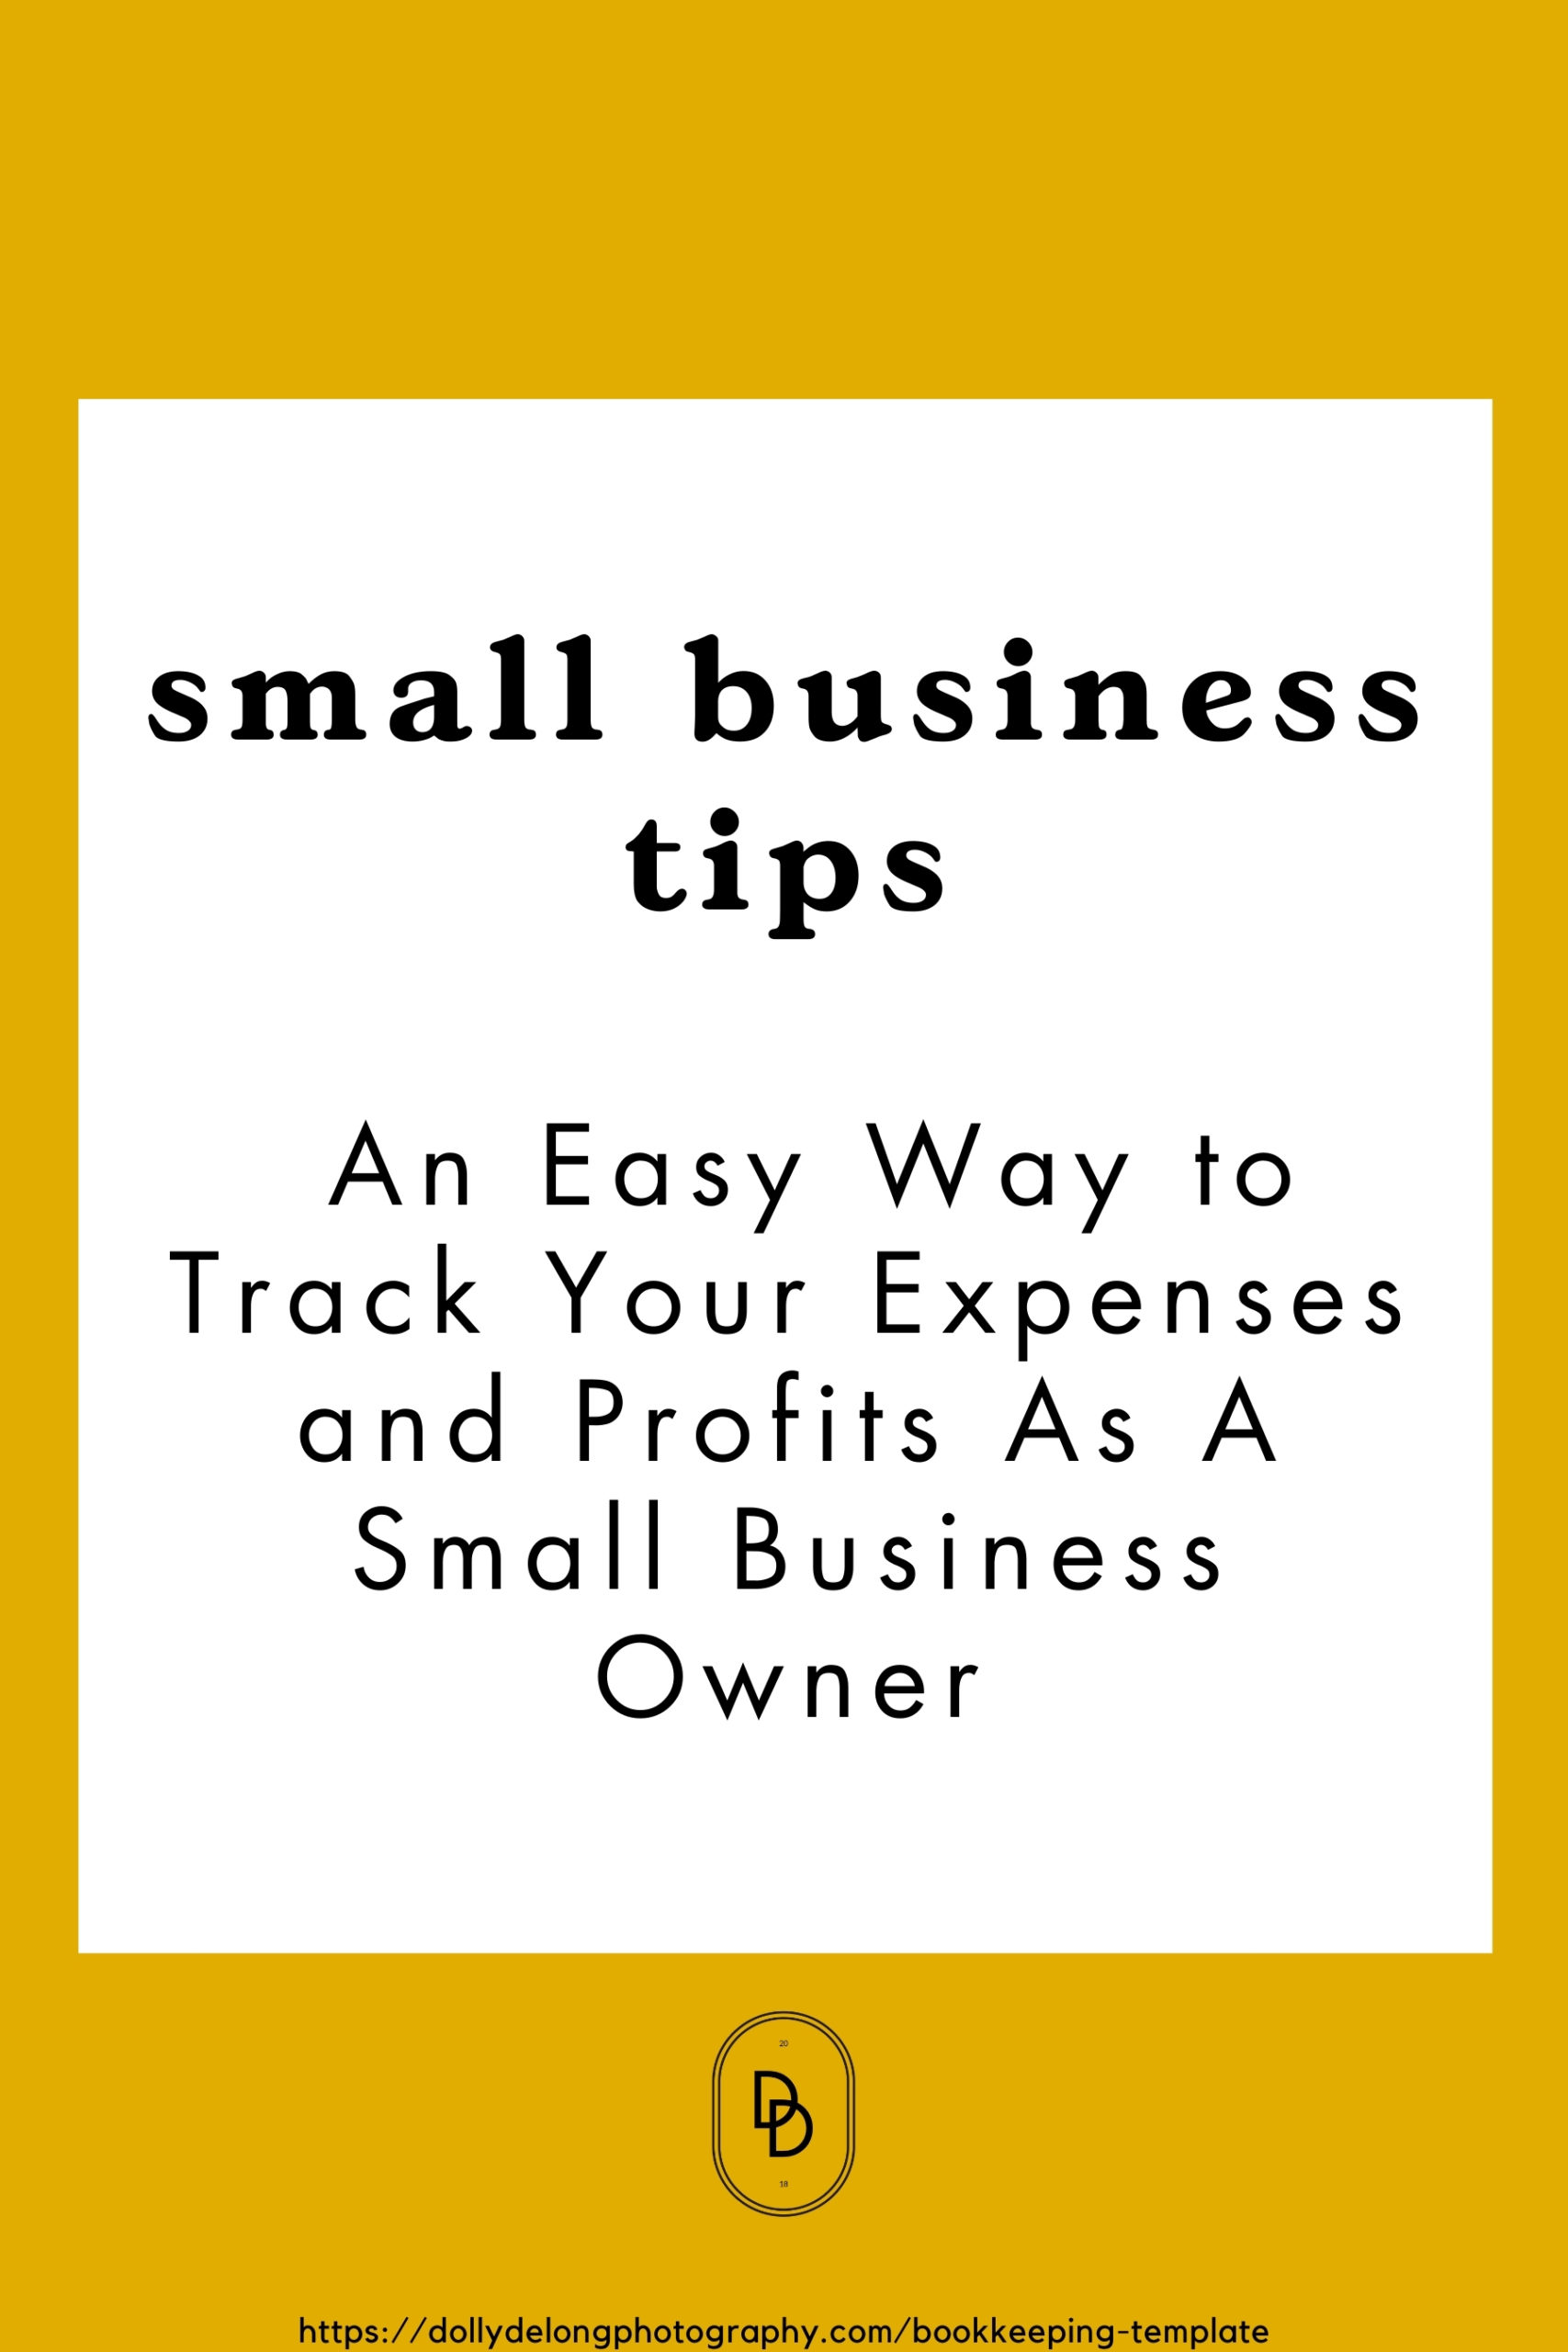 An Easy Way to Track Your Expenses and Profits As A Small Business Owner by Dolly DeLong Education